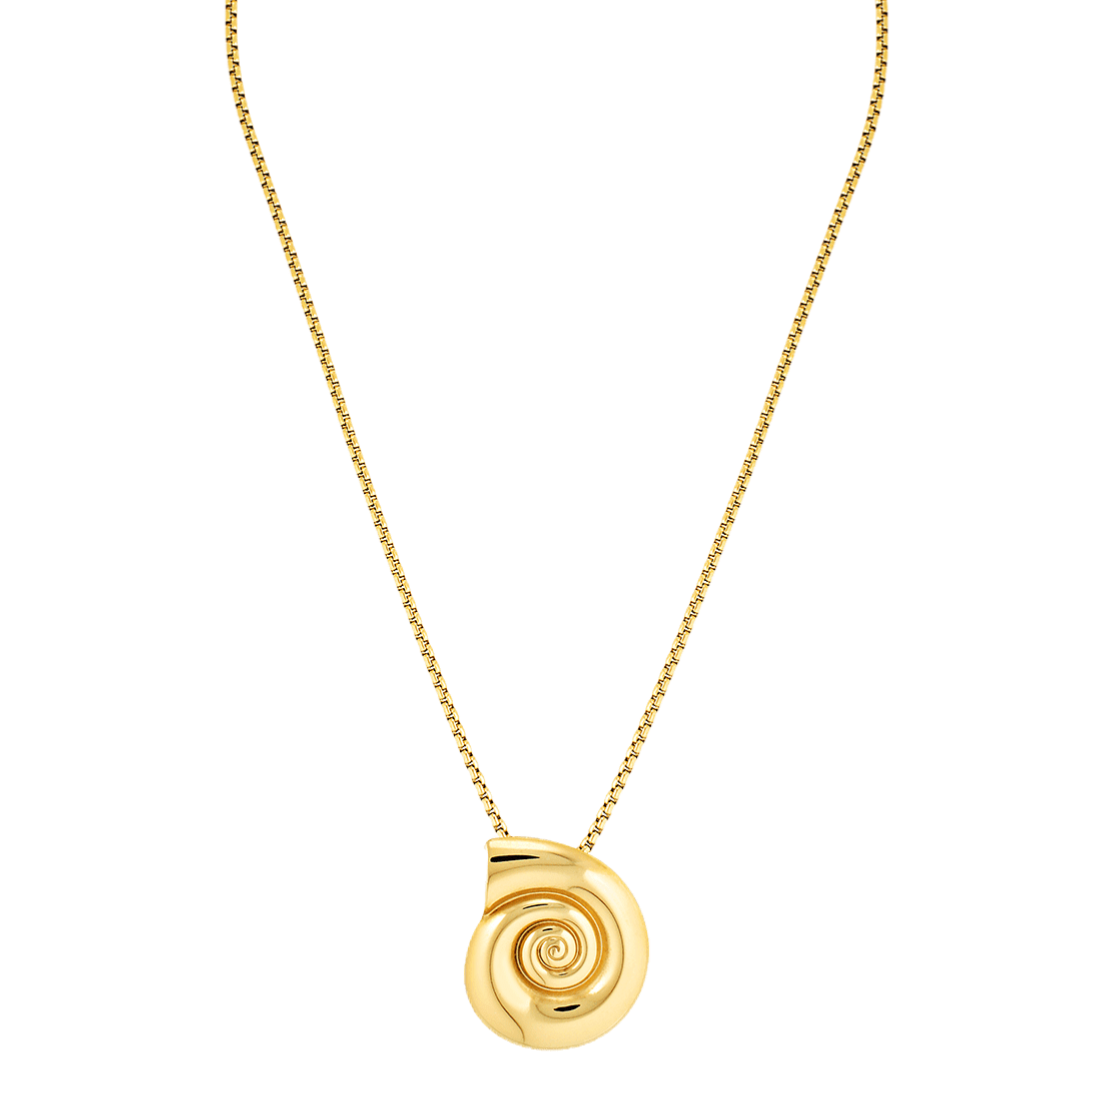 Shell shaped pendant necklace 